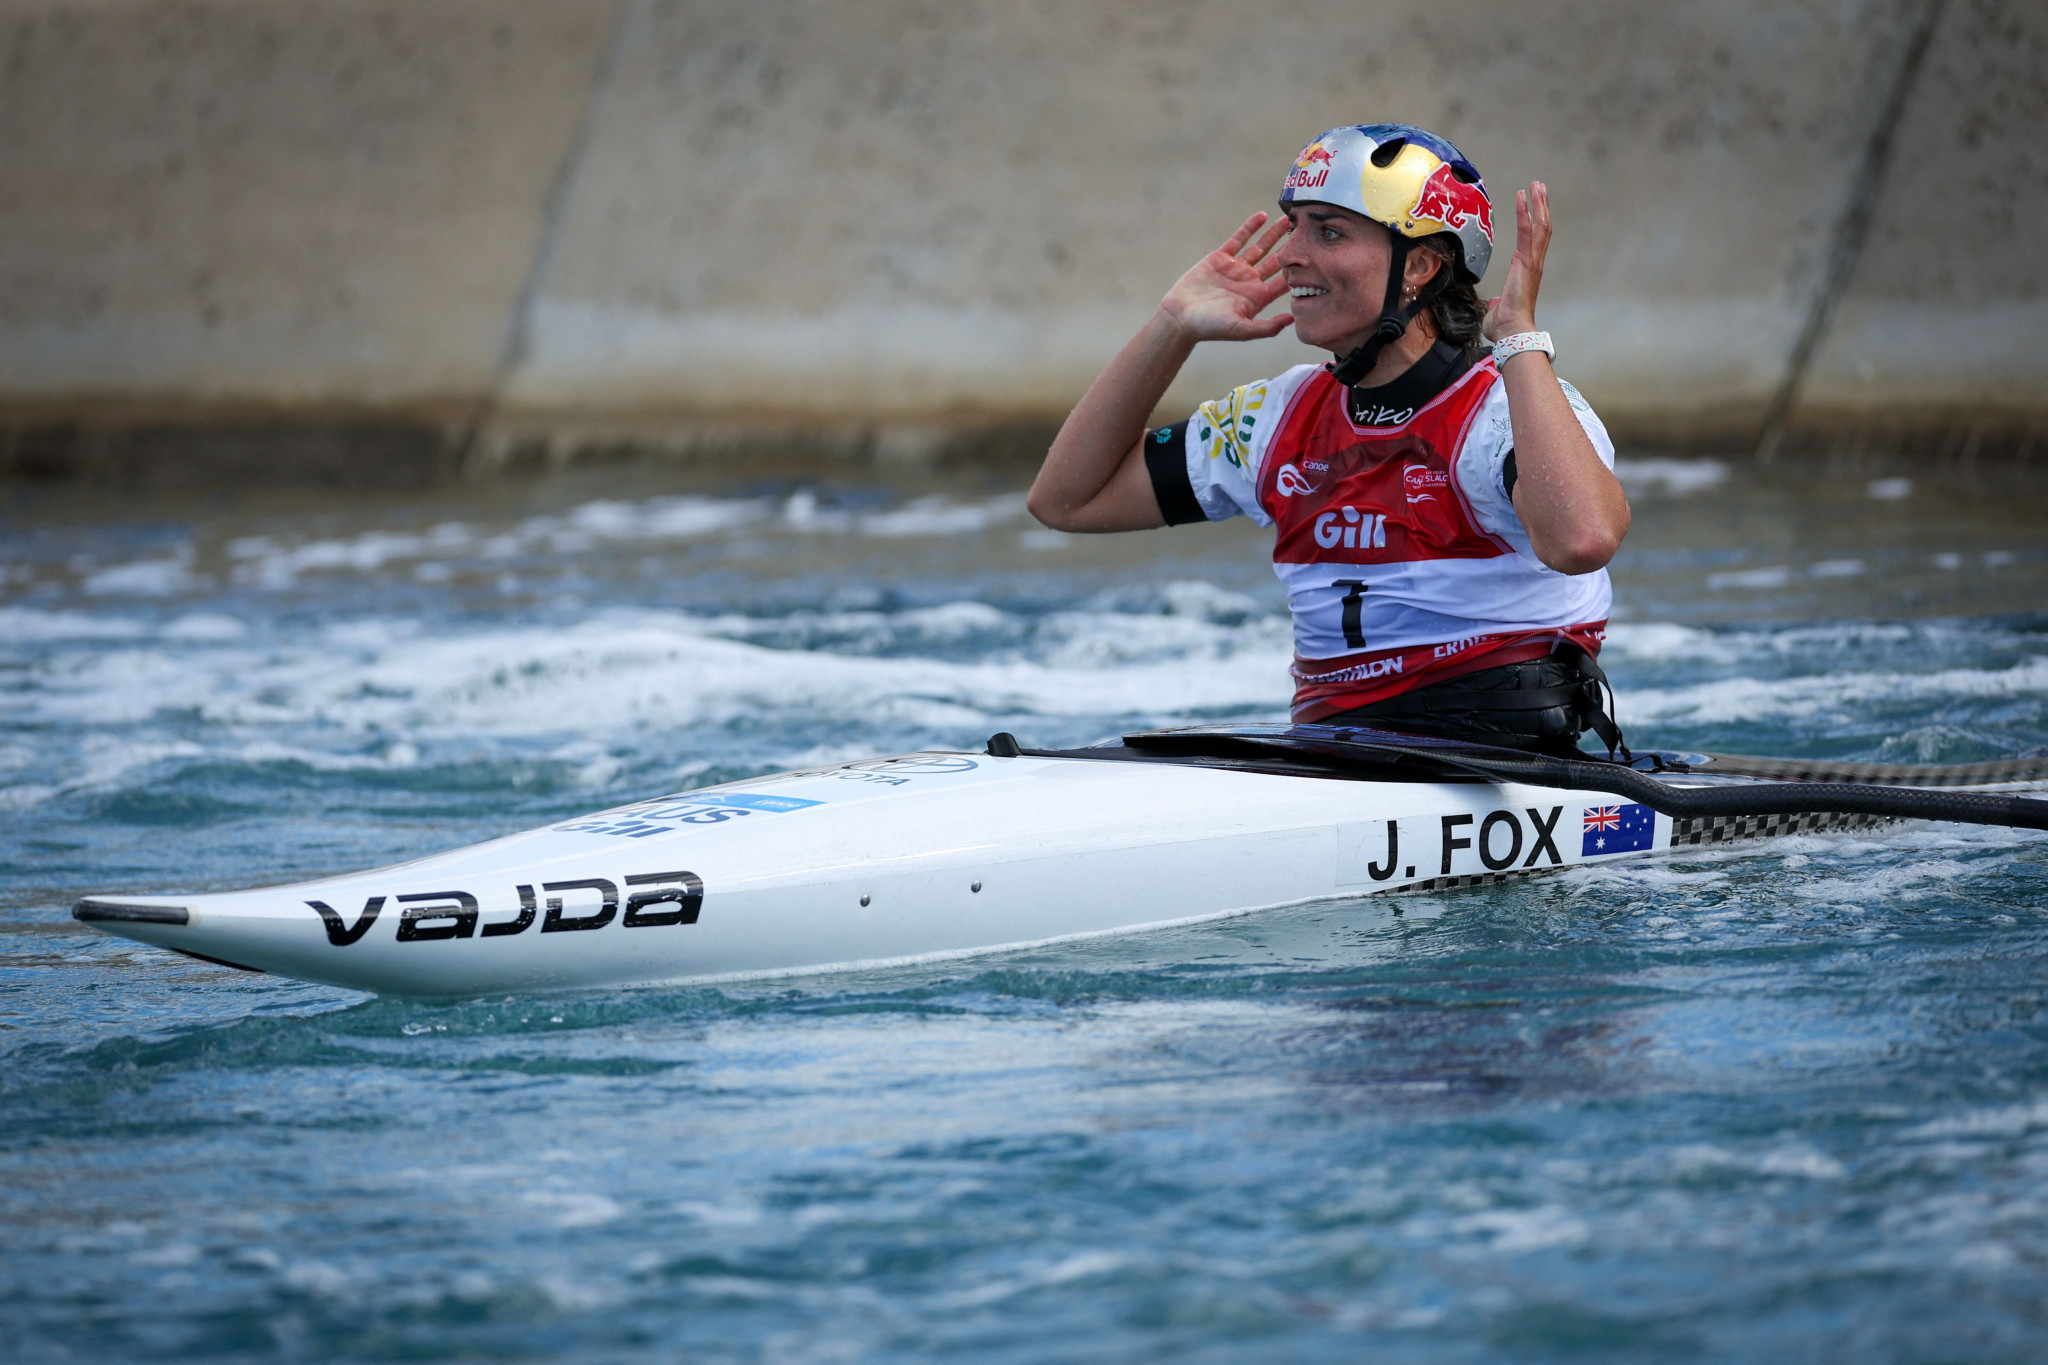 Australia's Jessica Fox added a women's kayak title at Lee Valley to her decorated list of honours ©Getty Images